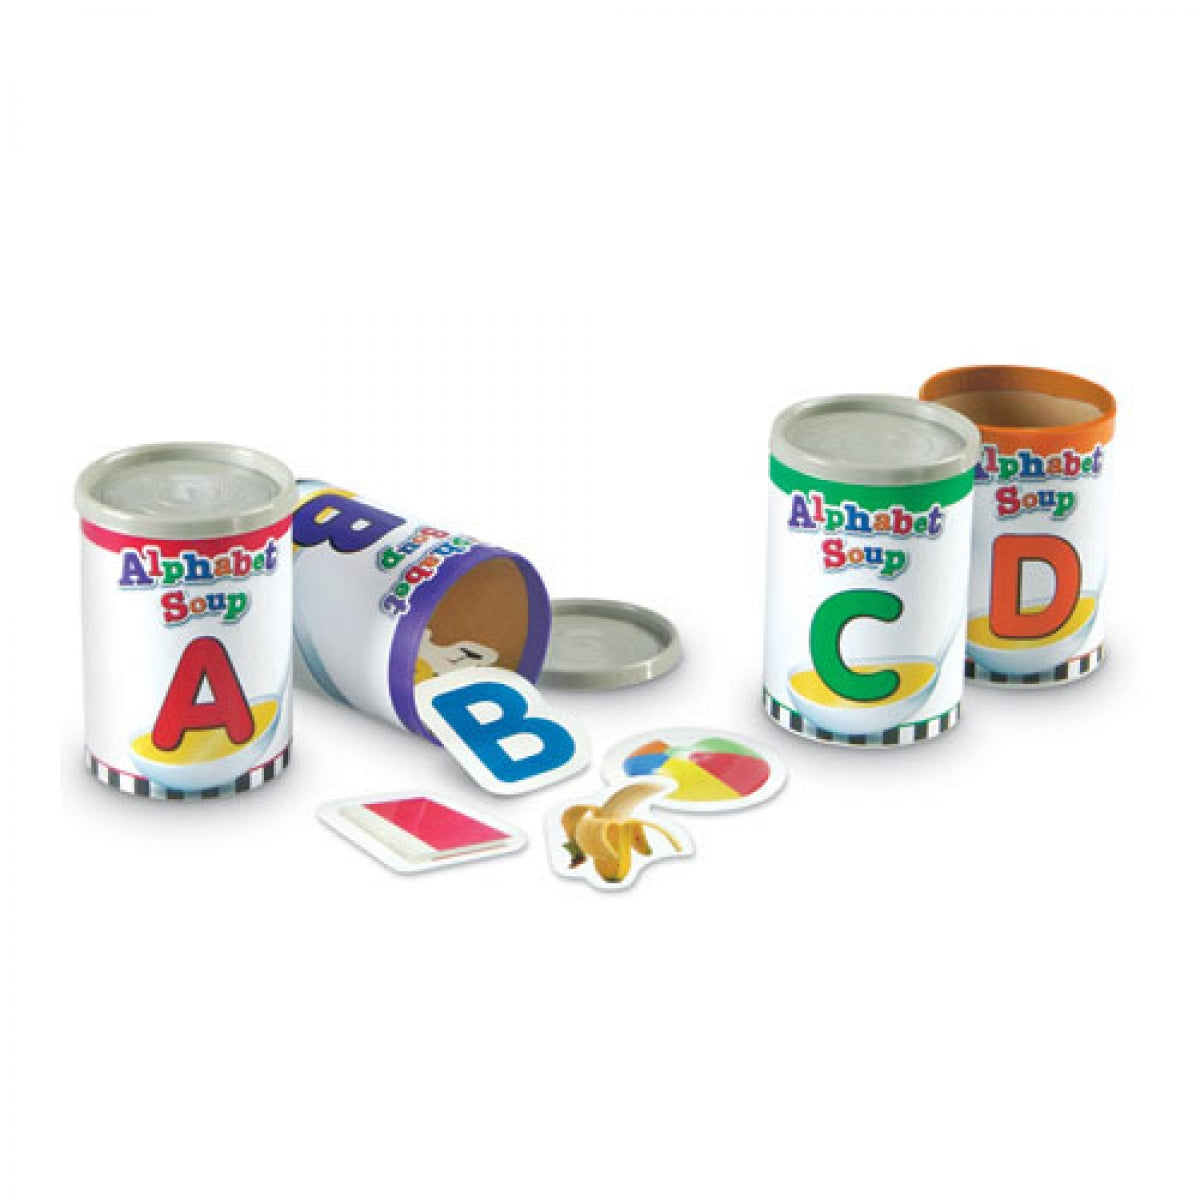 Alphabet Soup Sorters Learning Resources